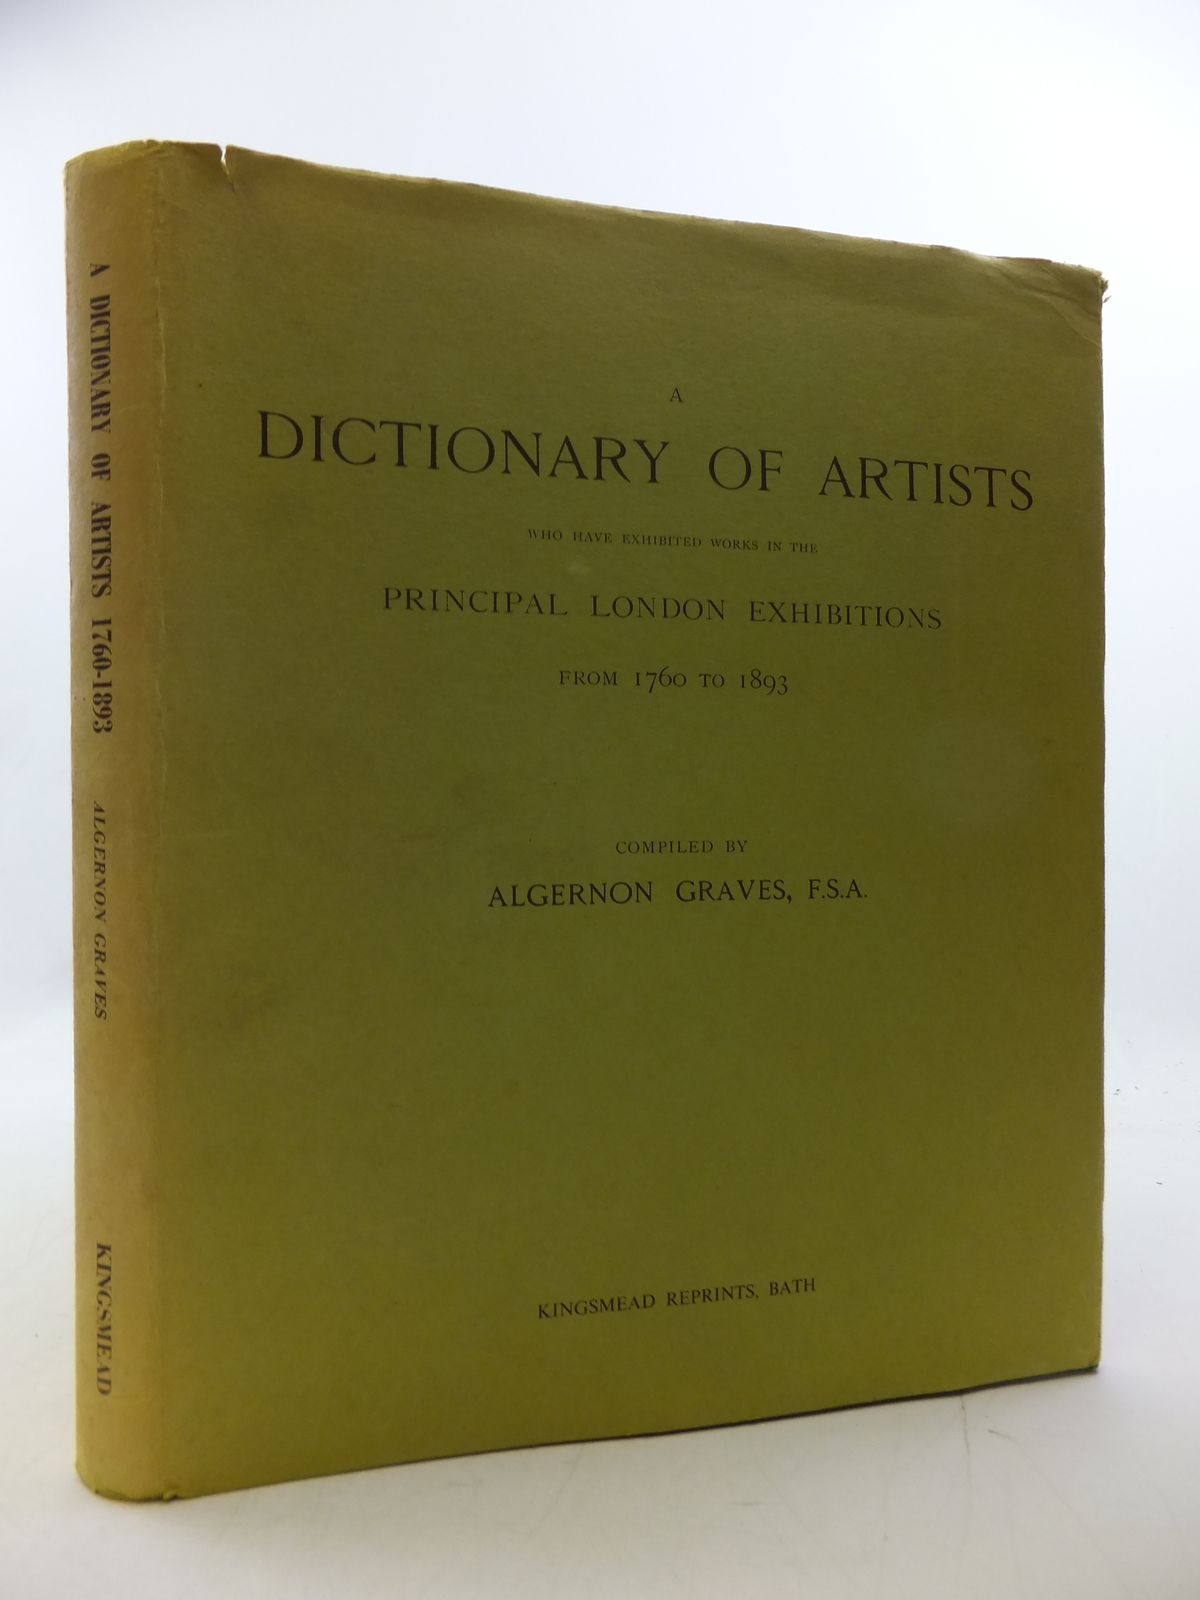 Photo of A DICTIONARY OF ARTISTS WHO HAVE EXHIBITED WORKS IN THE PRINCIPAL LONDON EXHIBITIONS FROM 1760 TO 1893 written by Graves, Algernon published by Kingsmead Reprints (STOCK CODE: 1808489)  for sale by Stella & Rose's Books